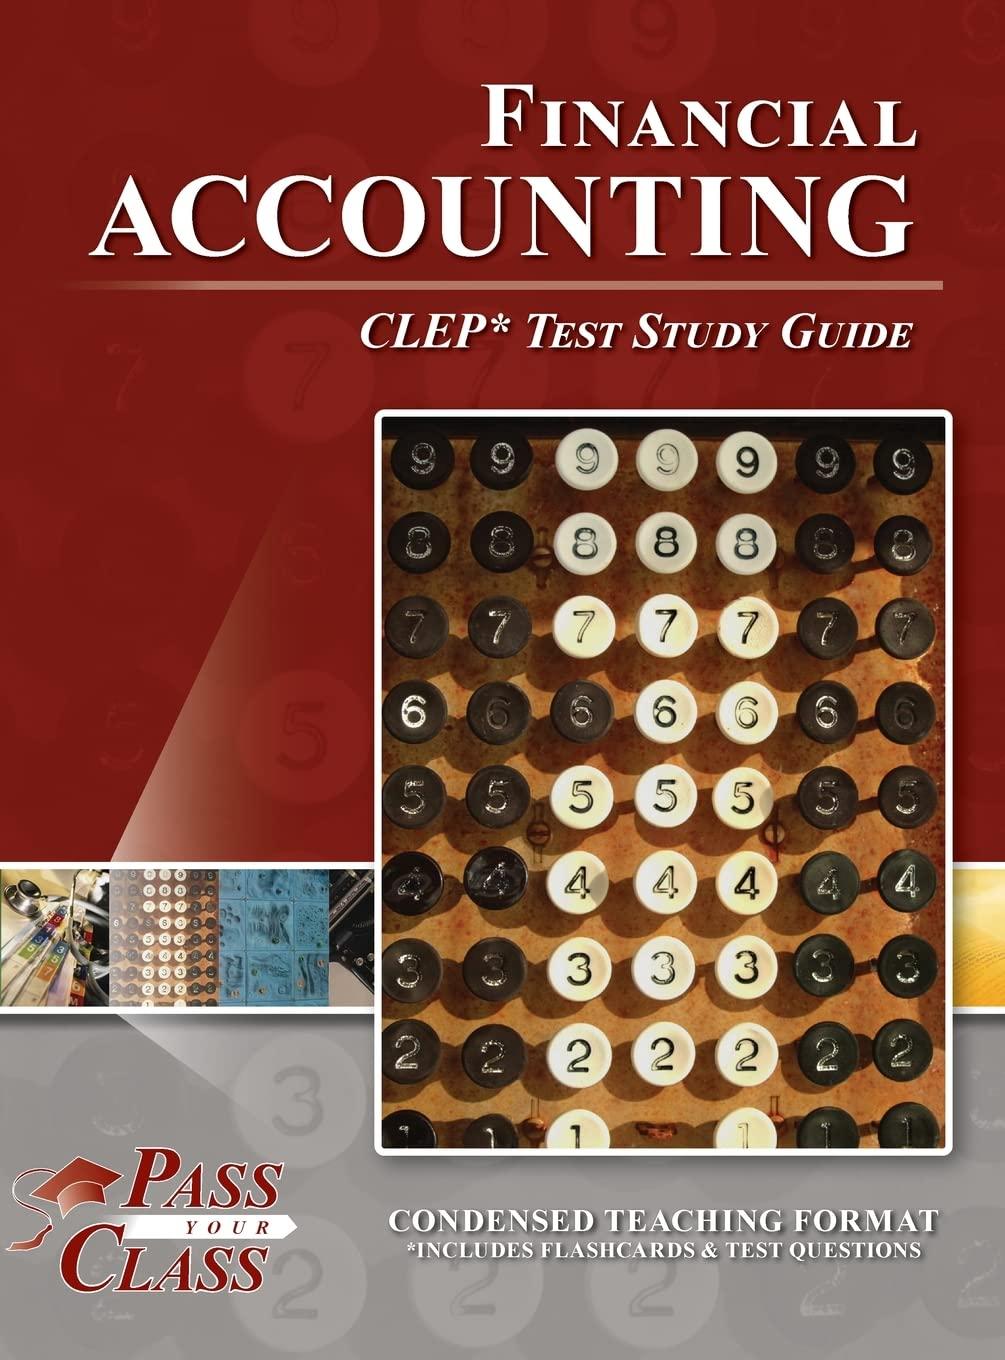 financial accounting clep test study guide 1st edition passyourclass 1614338558, 978-1614338550